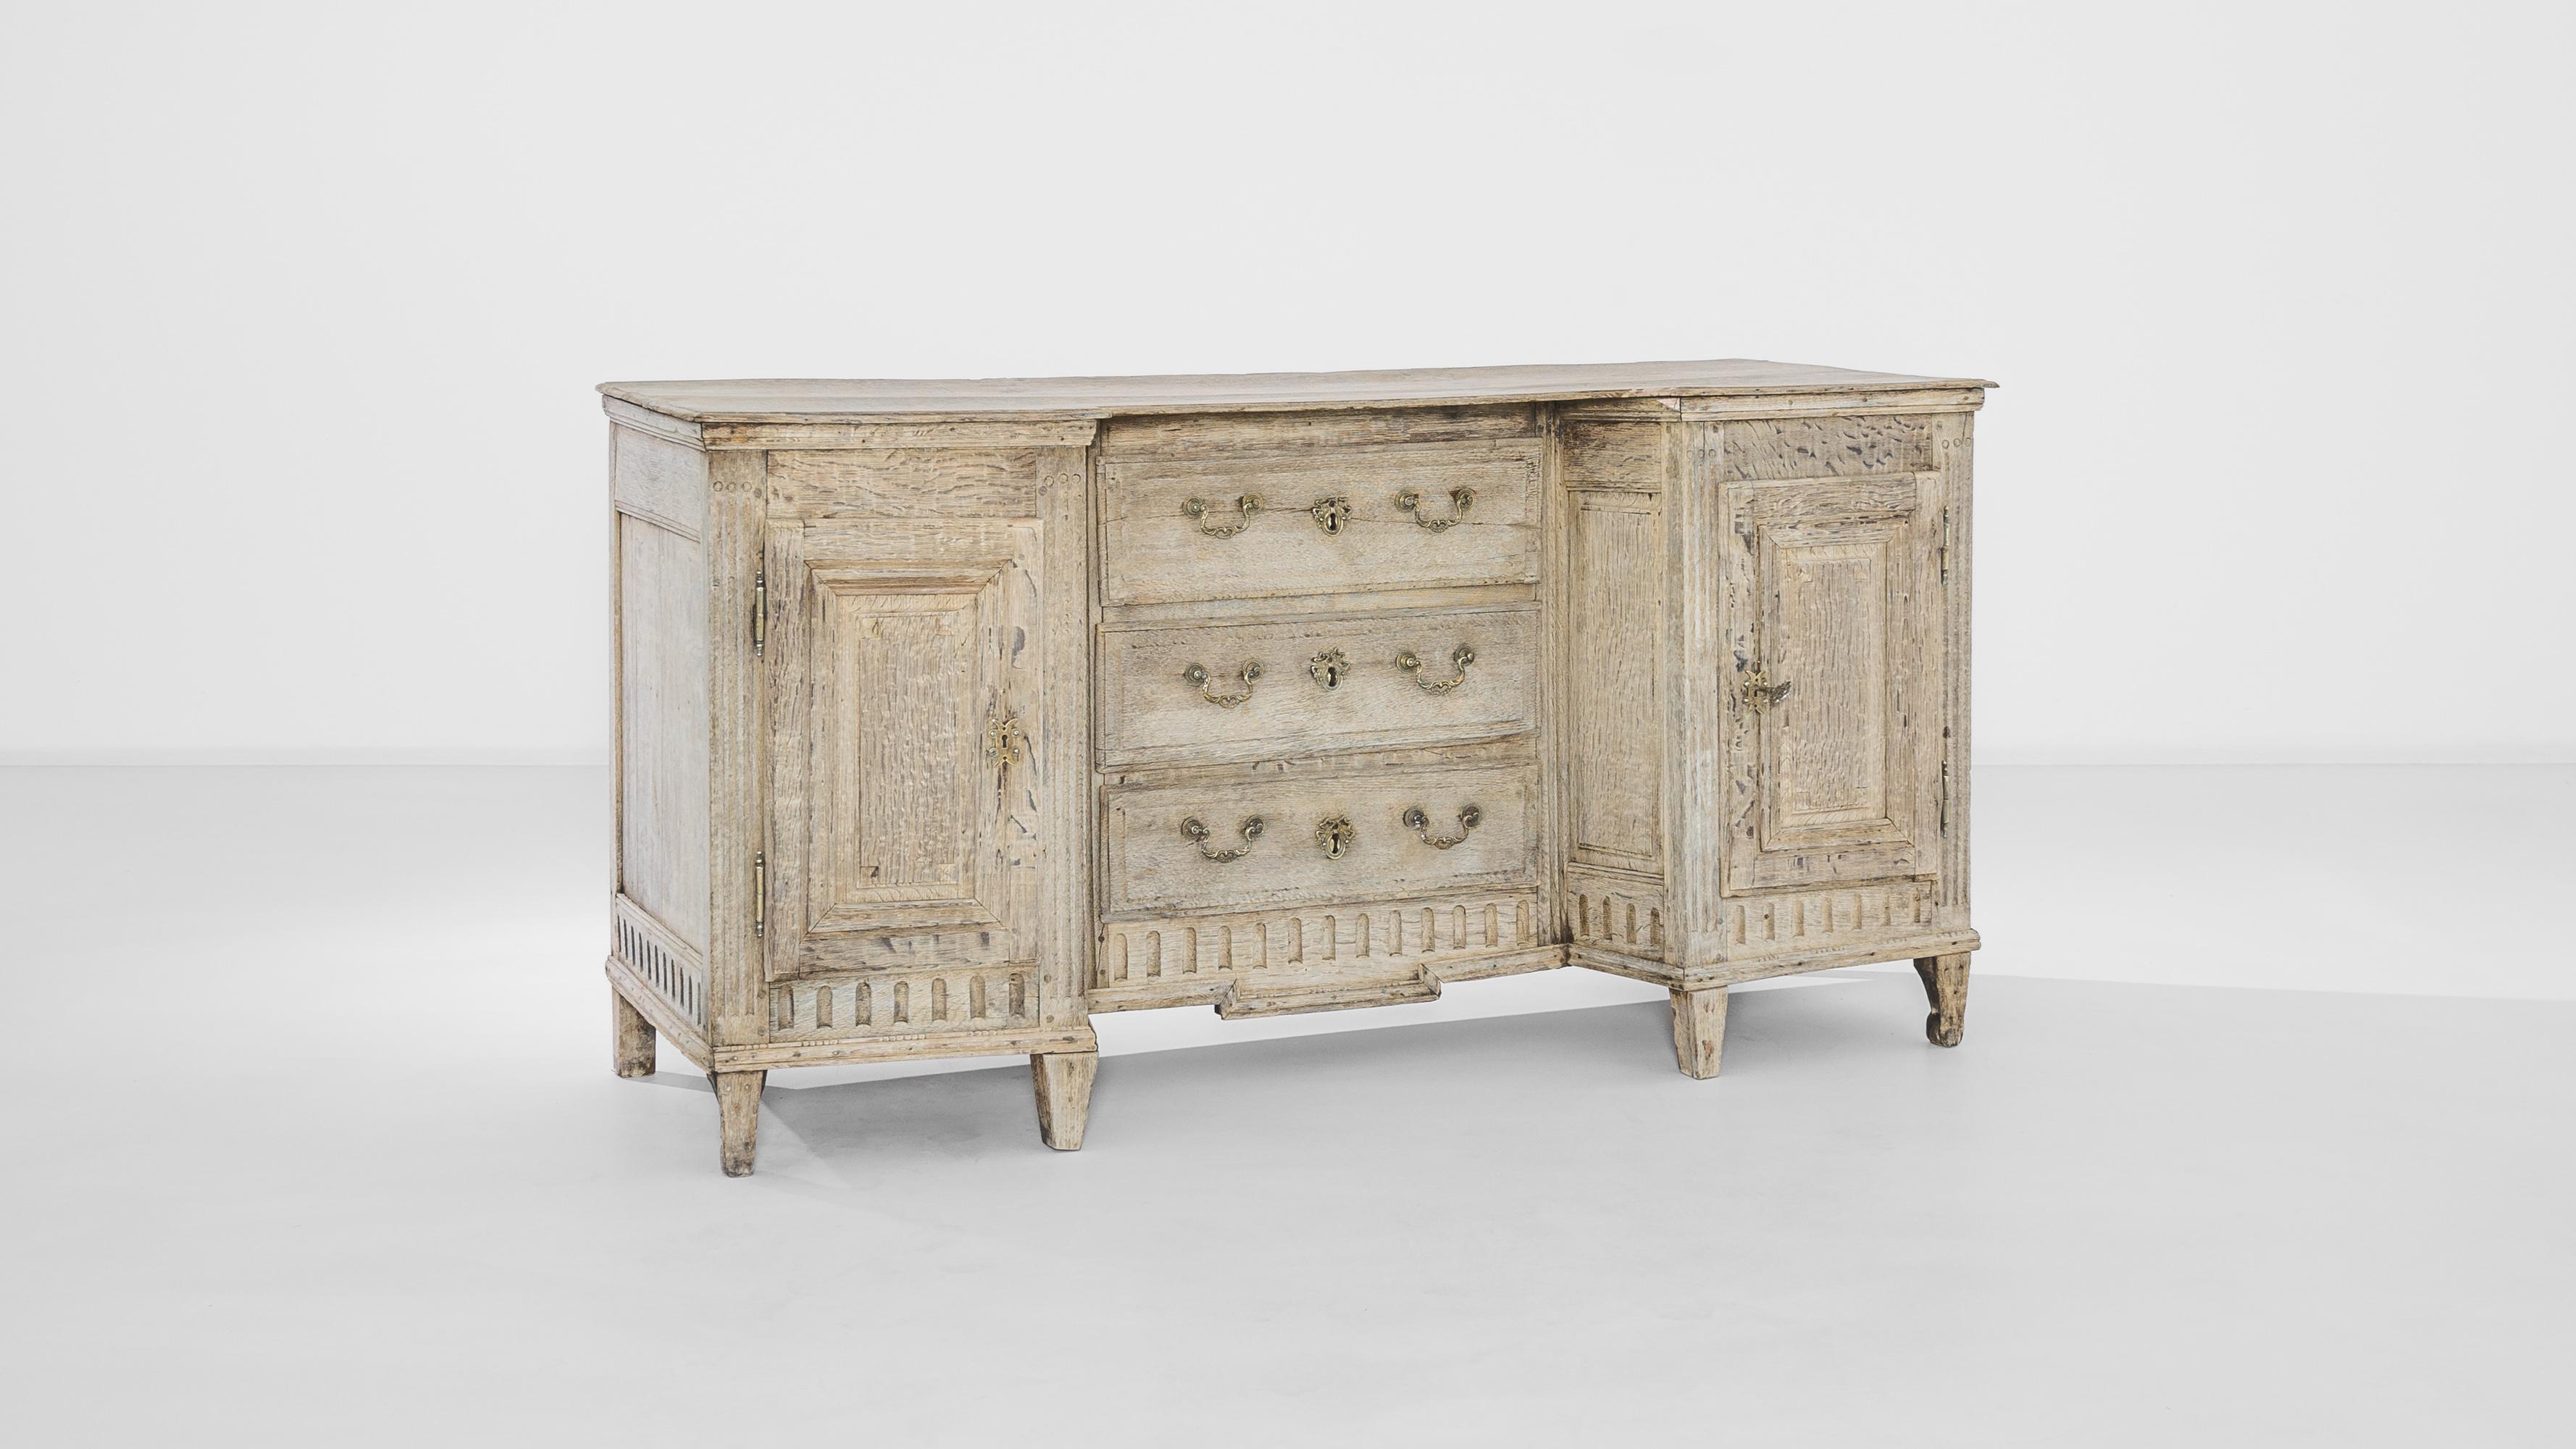 Crafted in France circa 1850, this oak cabinet features three compartments with an inset bank of drawers, giving a cozy niche to sit. The tapered feet, carved apron and fluted sides punctuate the unconventional geometry of its silhouette. Ornate